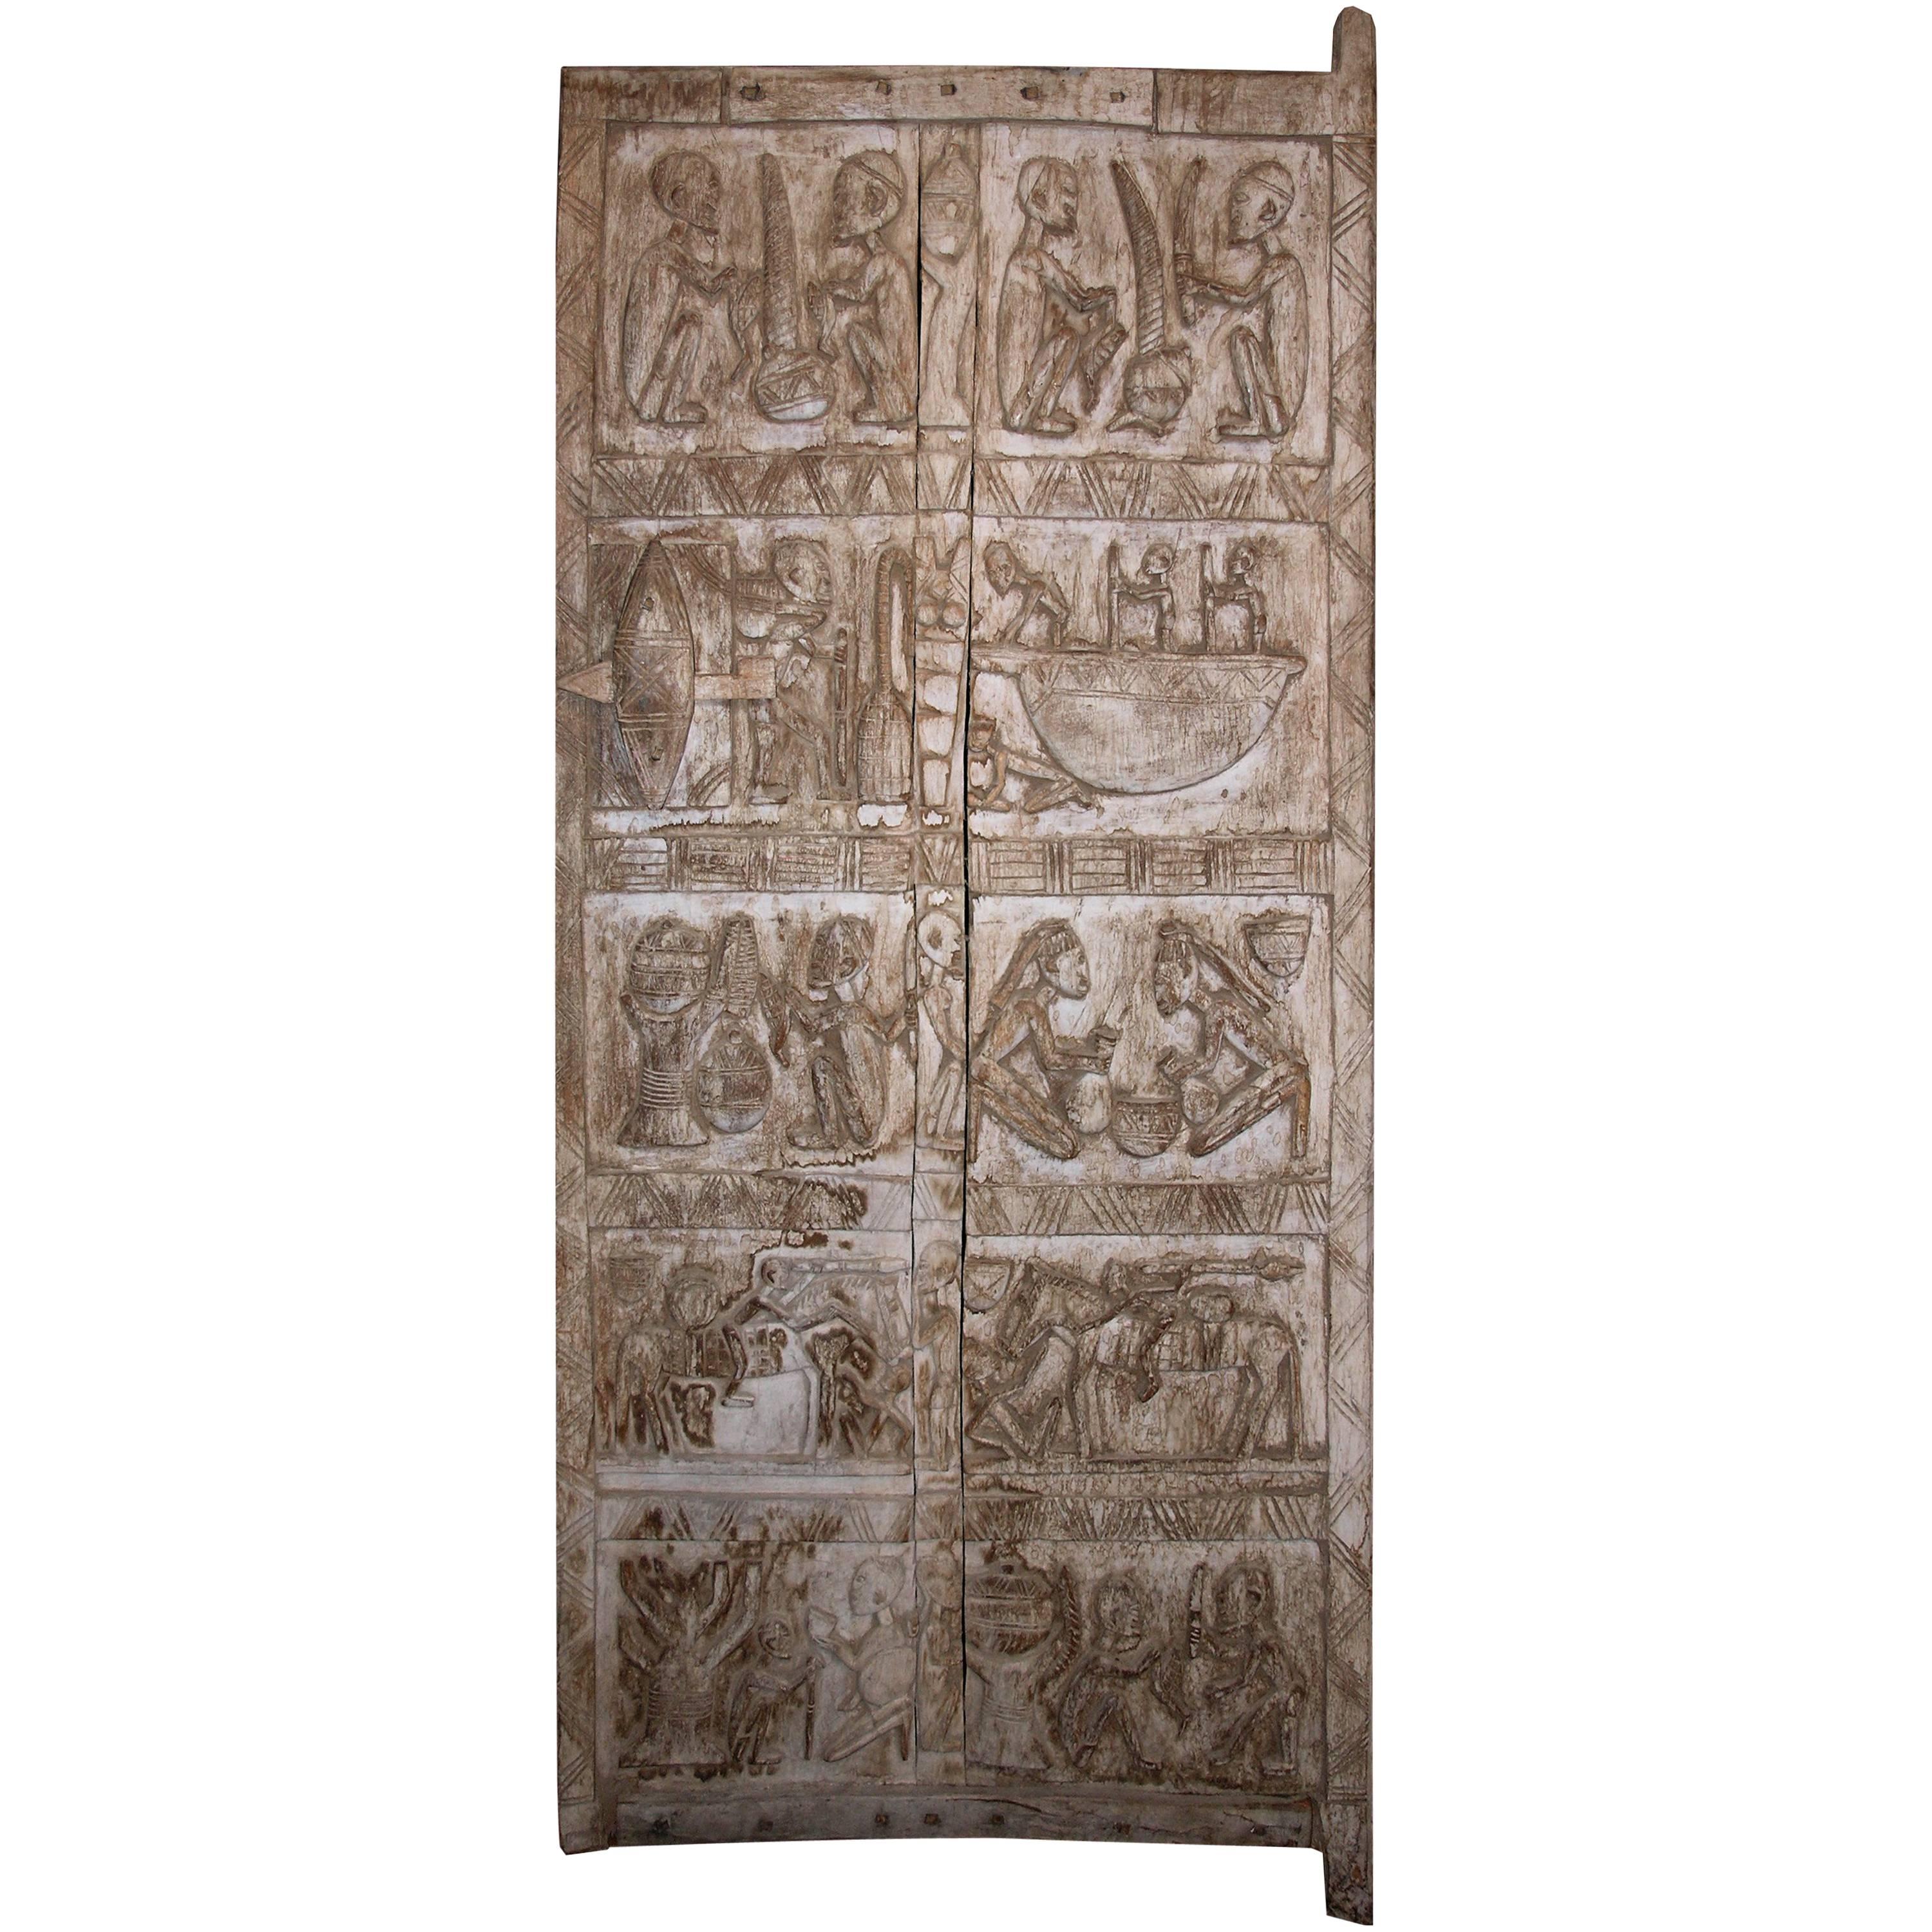 Antique Carved Door from Mali